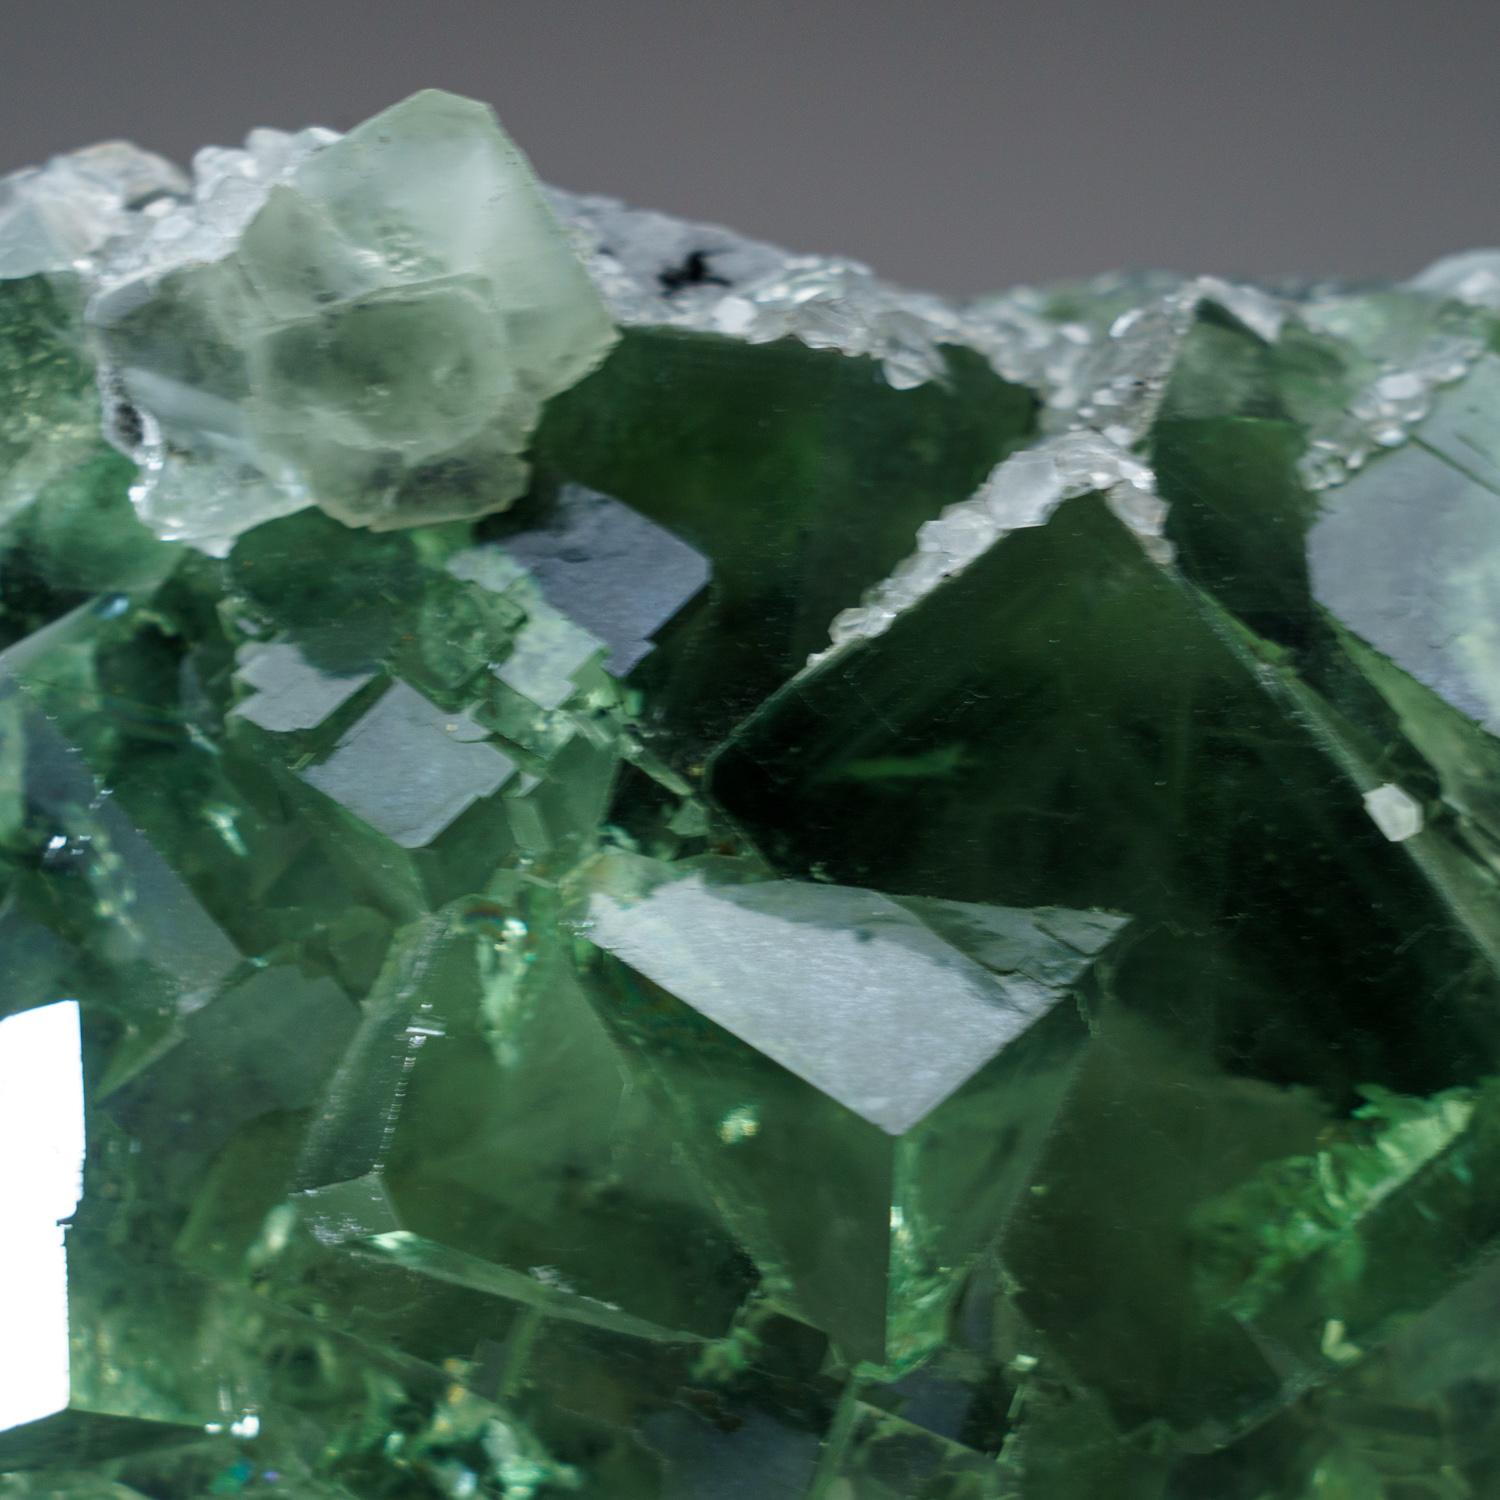 From Shanhua Pu Mine, Xianghualing, Hunan Province, China

Lustrous transparent green cubic fluorite crystals covered with colorless calcite crystals. The fluorite crystals are transparent and cubic crystal habit with complex corners of smaller